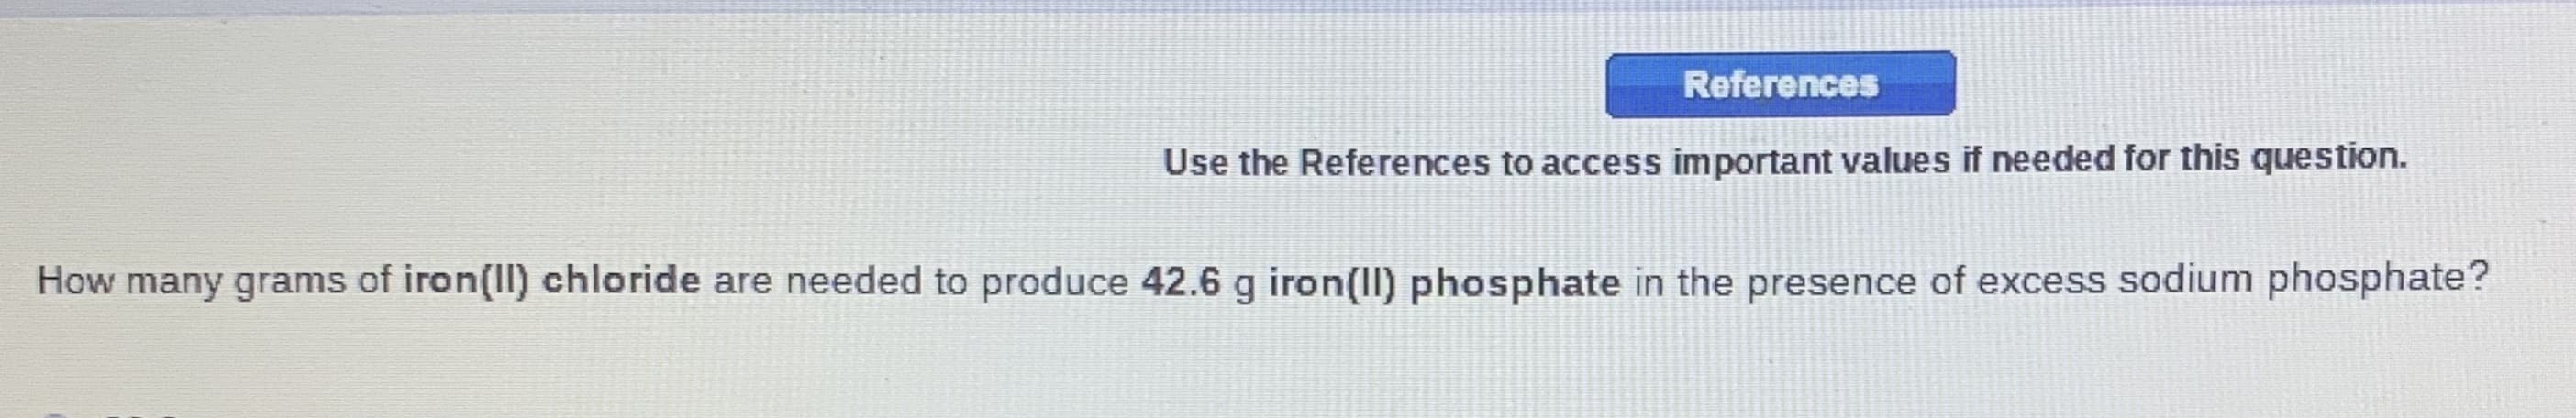 References
Use the References to access important values if needed for this question.
How many grams of iron(II) chloride are needed to produce 42.6 g iron(II) phosphate in the presence of excess sodium phosphate?
